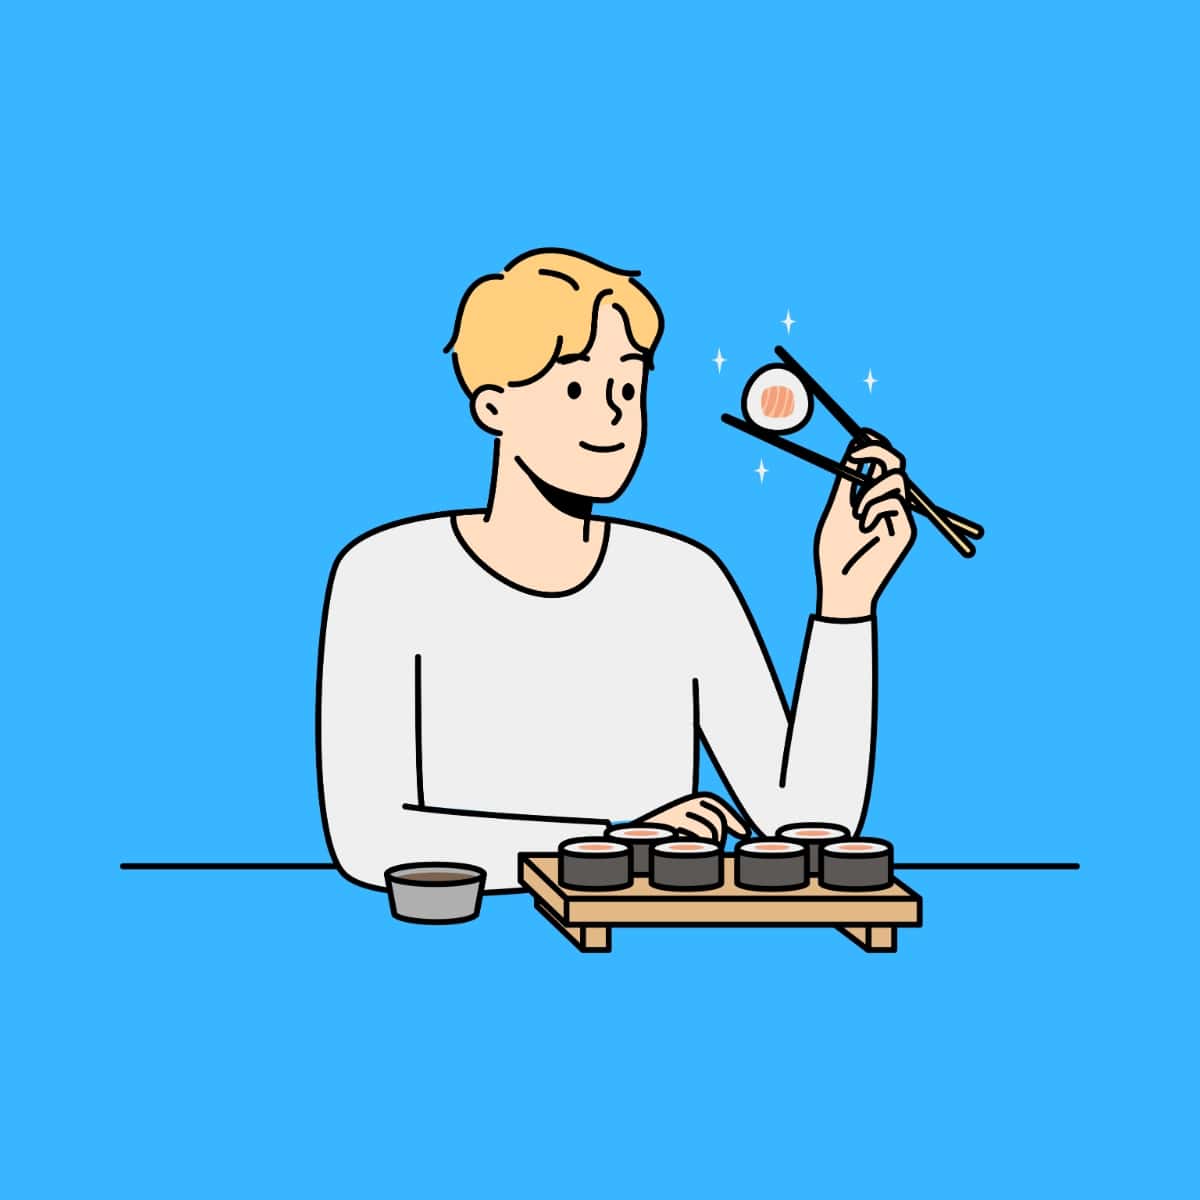 Cartoon graphic of a man with sushi holding one piece that is sparkling with chopsticks on a blue background.